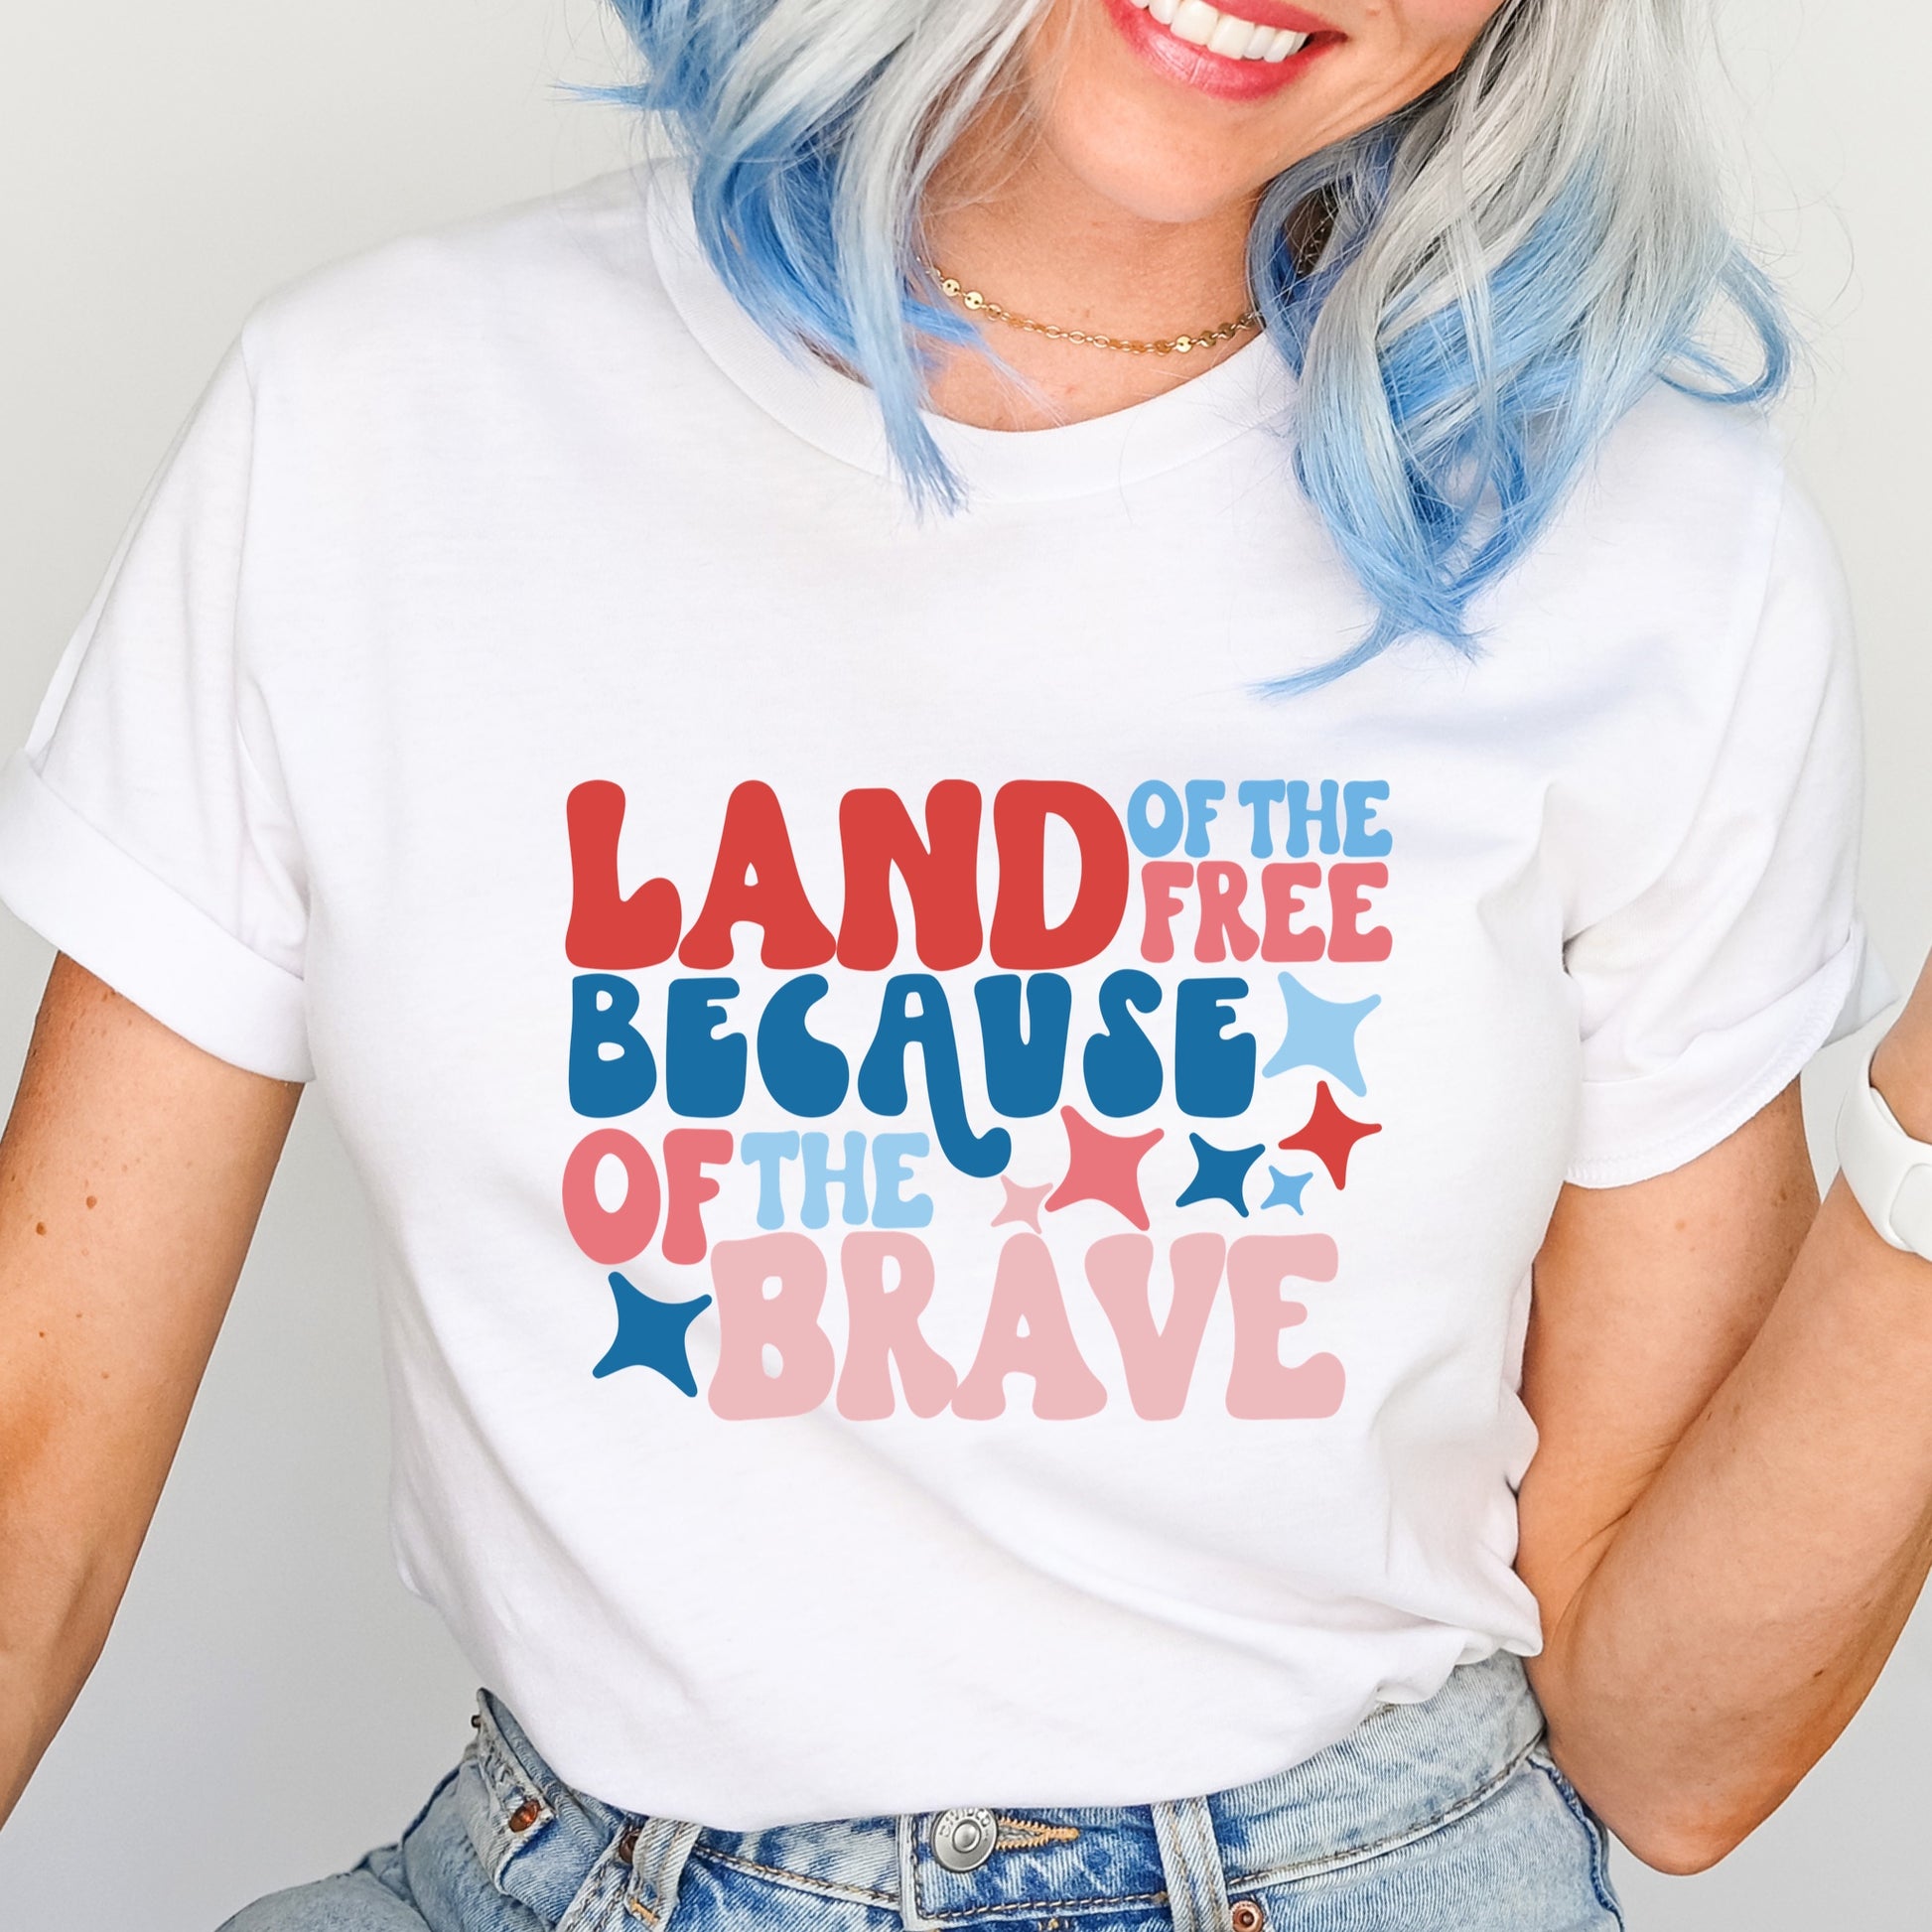 Patriotic phrase "Land of the Free Because of the Brave" red and blue iron on heat transfer.